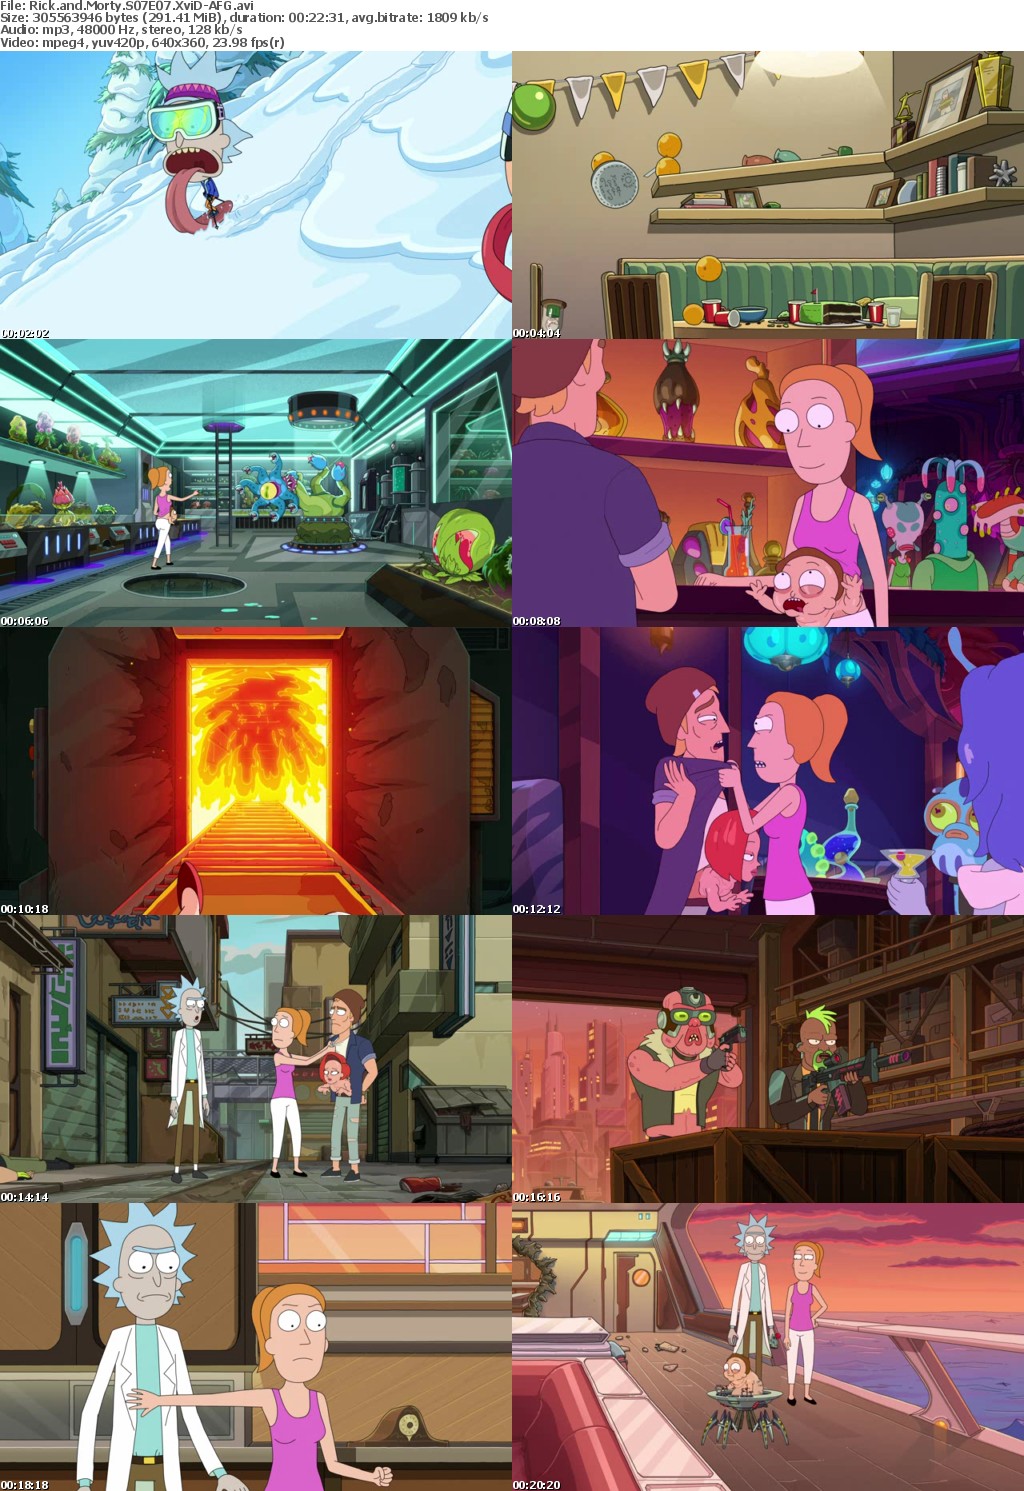 Rick and Morty S07E07 XviD-AFG